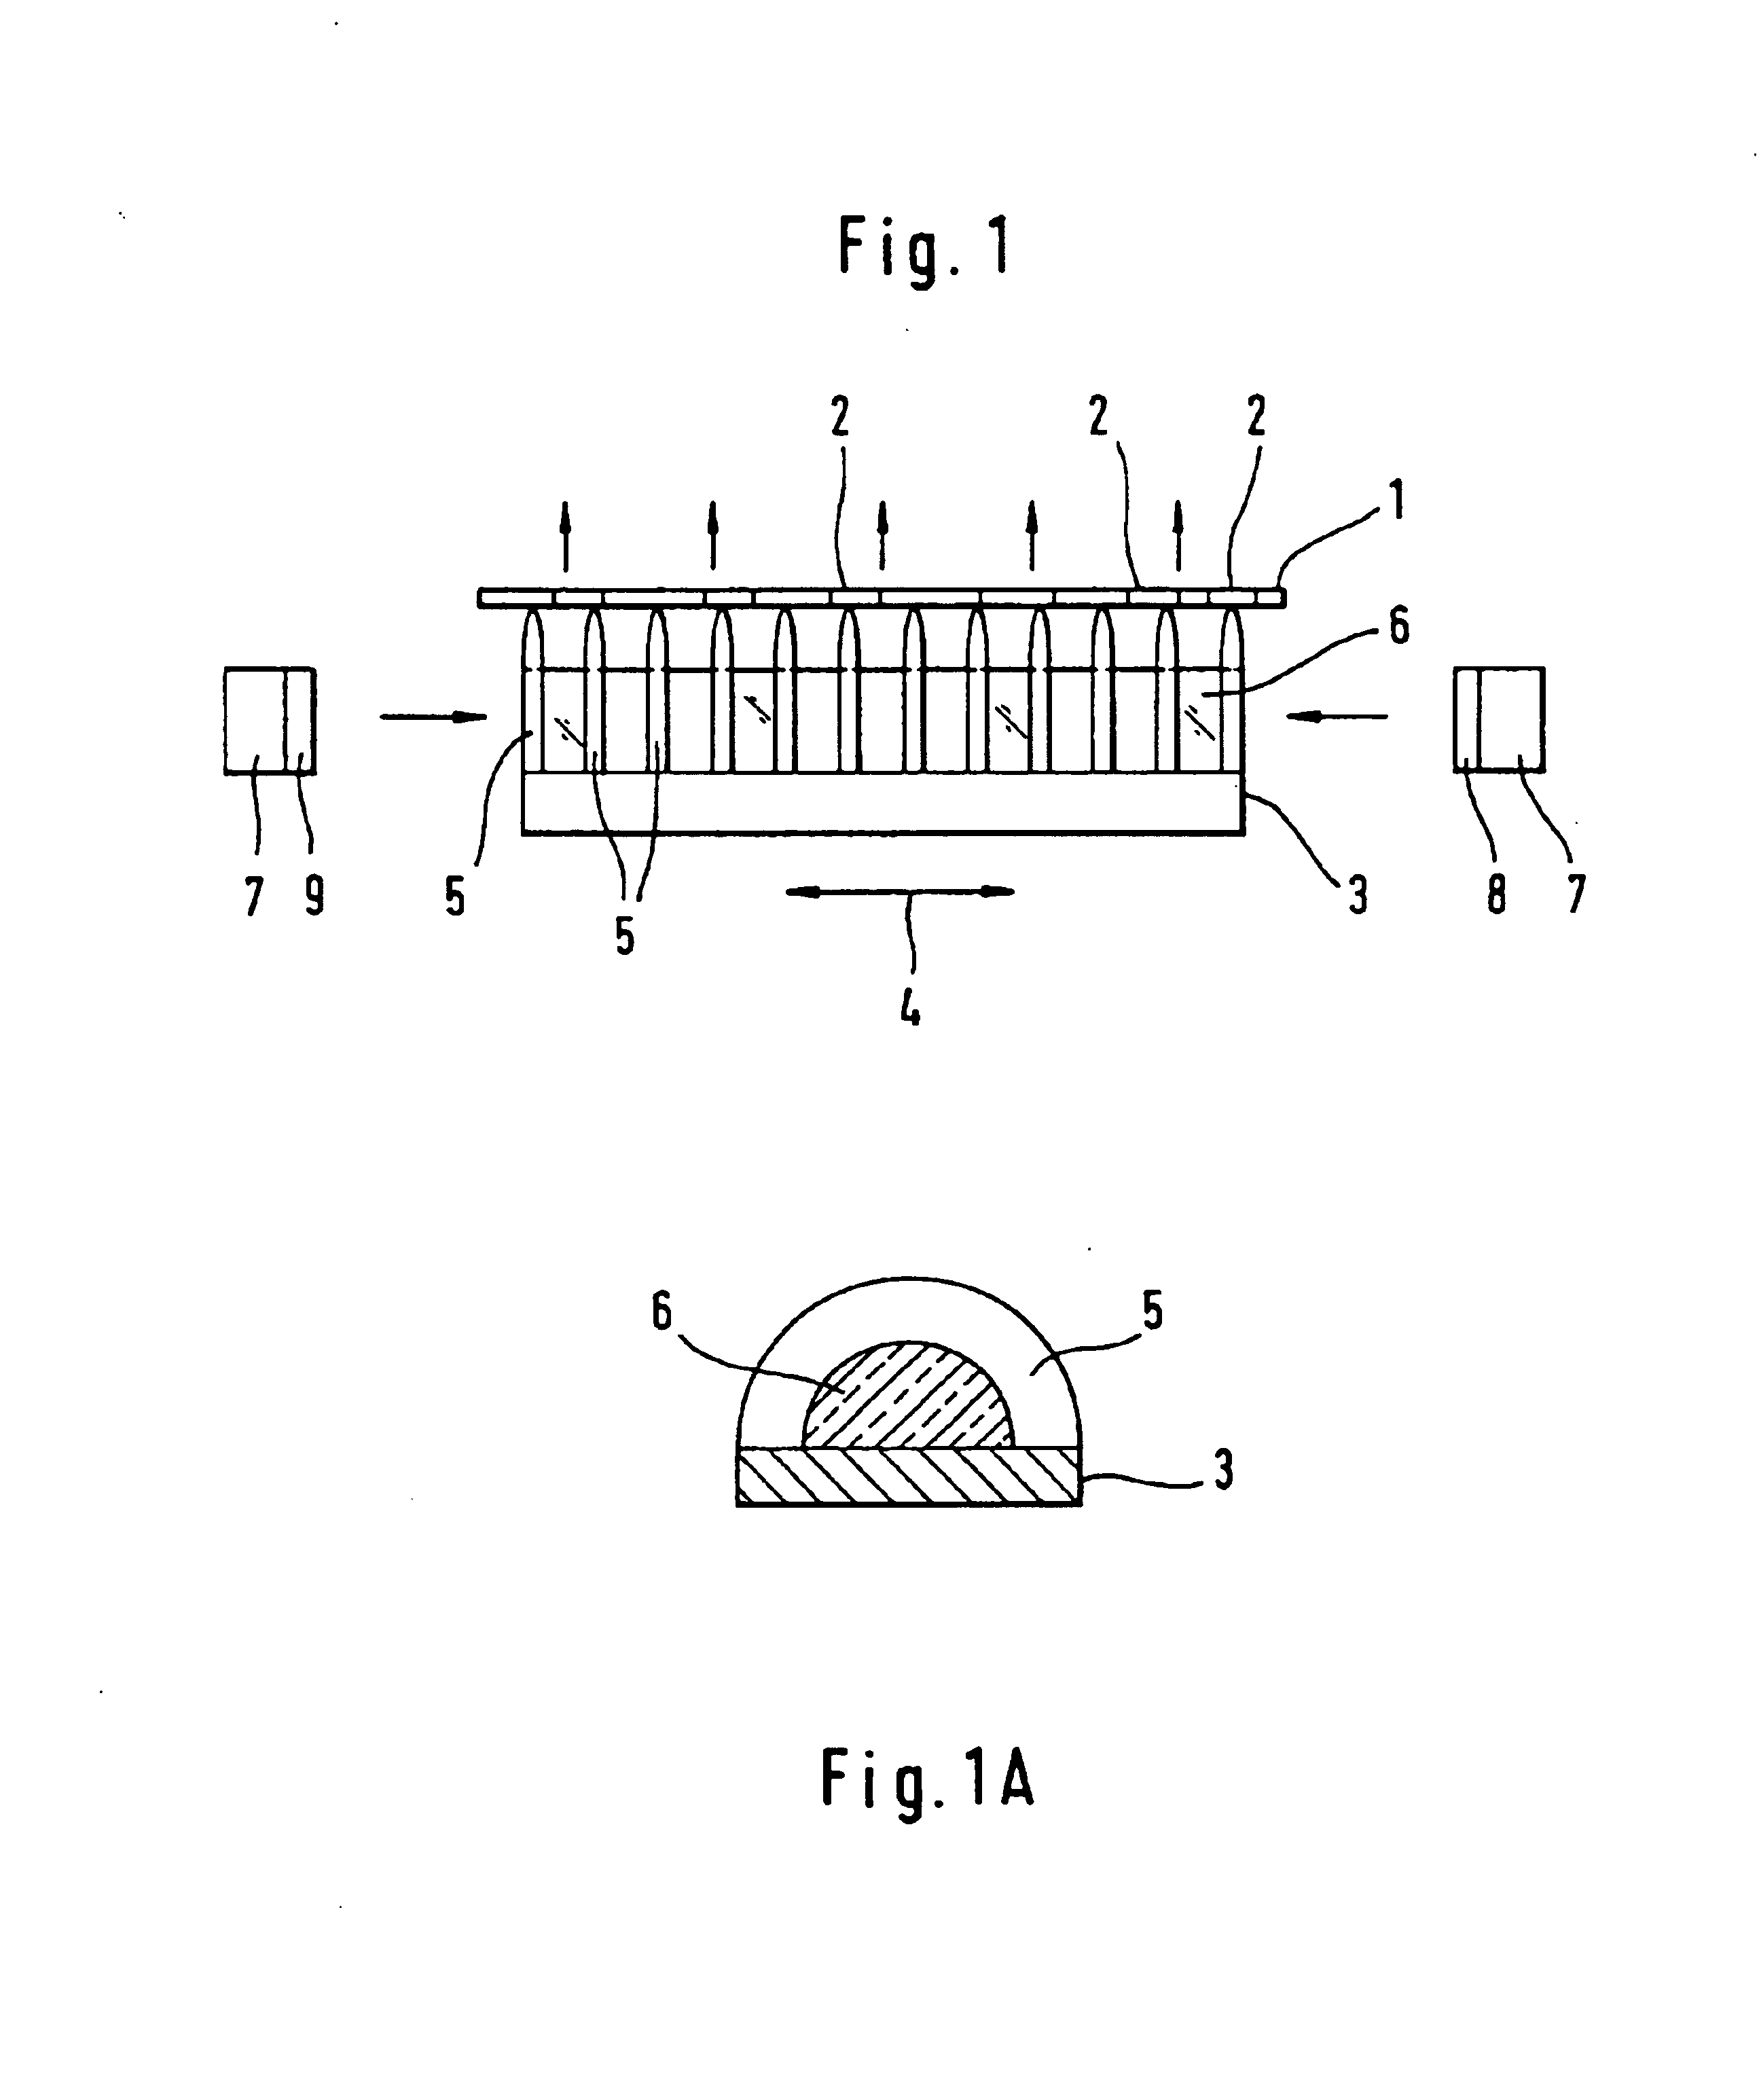 Electrically driven hair removal device